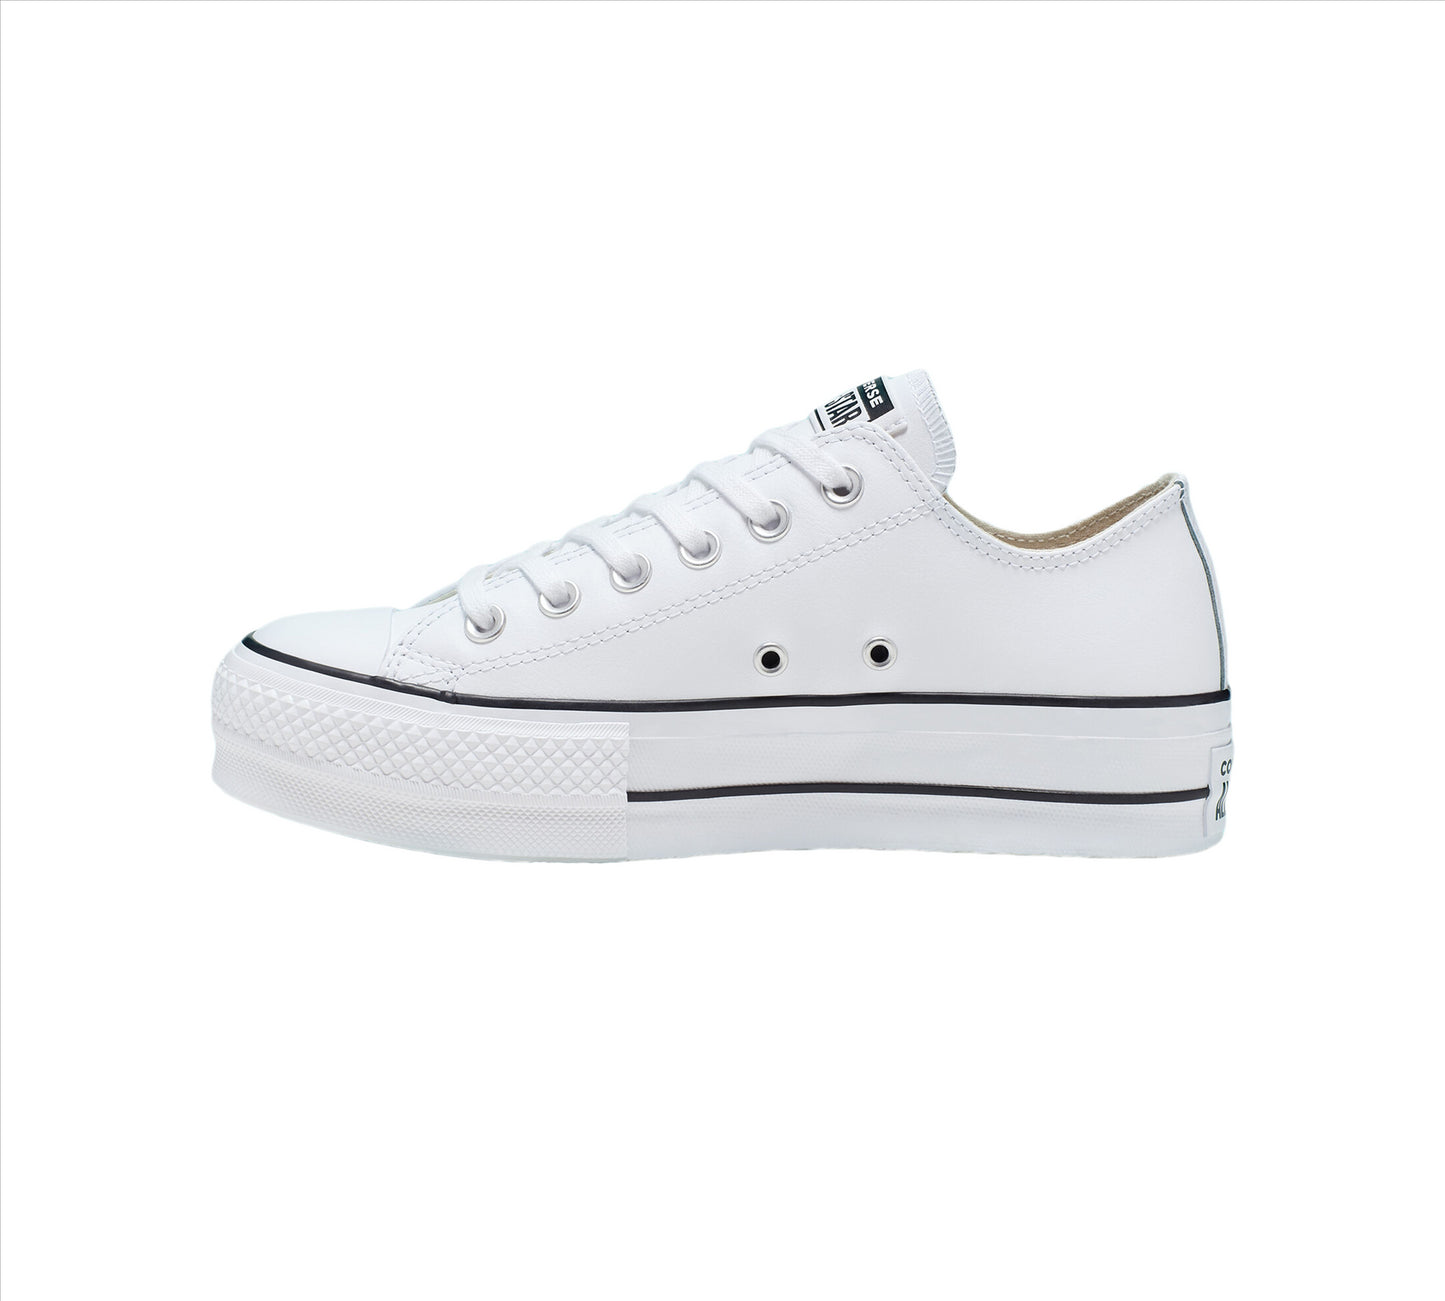 Converse Chuck Taylor All Star Platform 561680C Shoes Clean Leather White UK 3-8